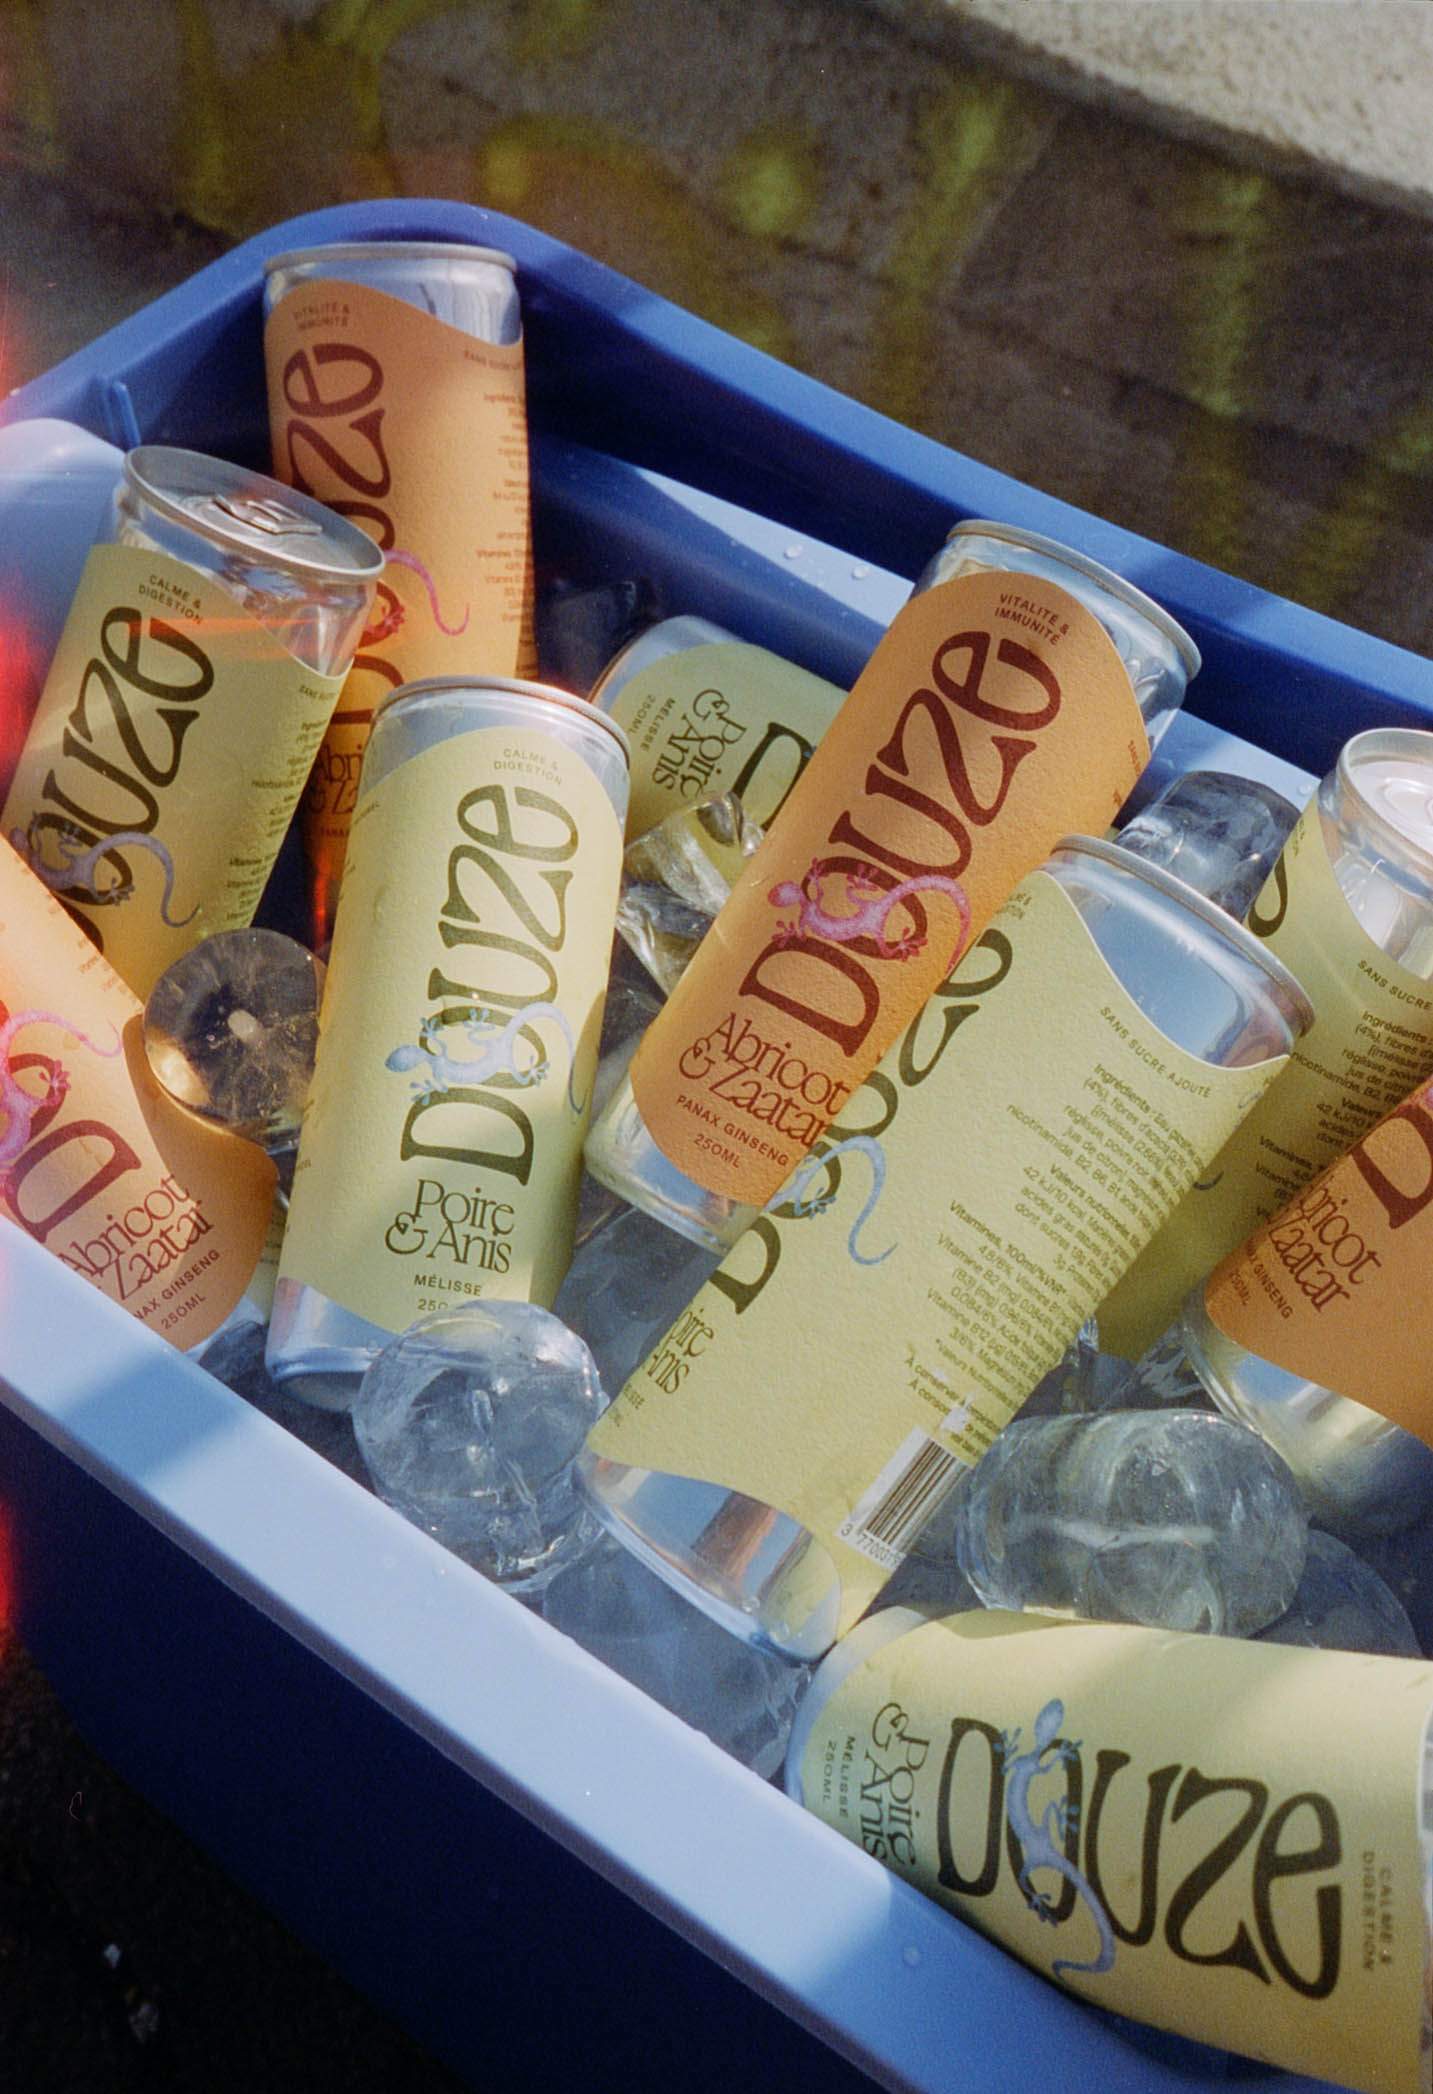 Chilled Douze cans in blue cooler with ice, captured in a nostalgic film photo style with light leak effects.